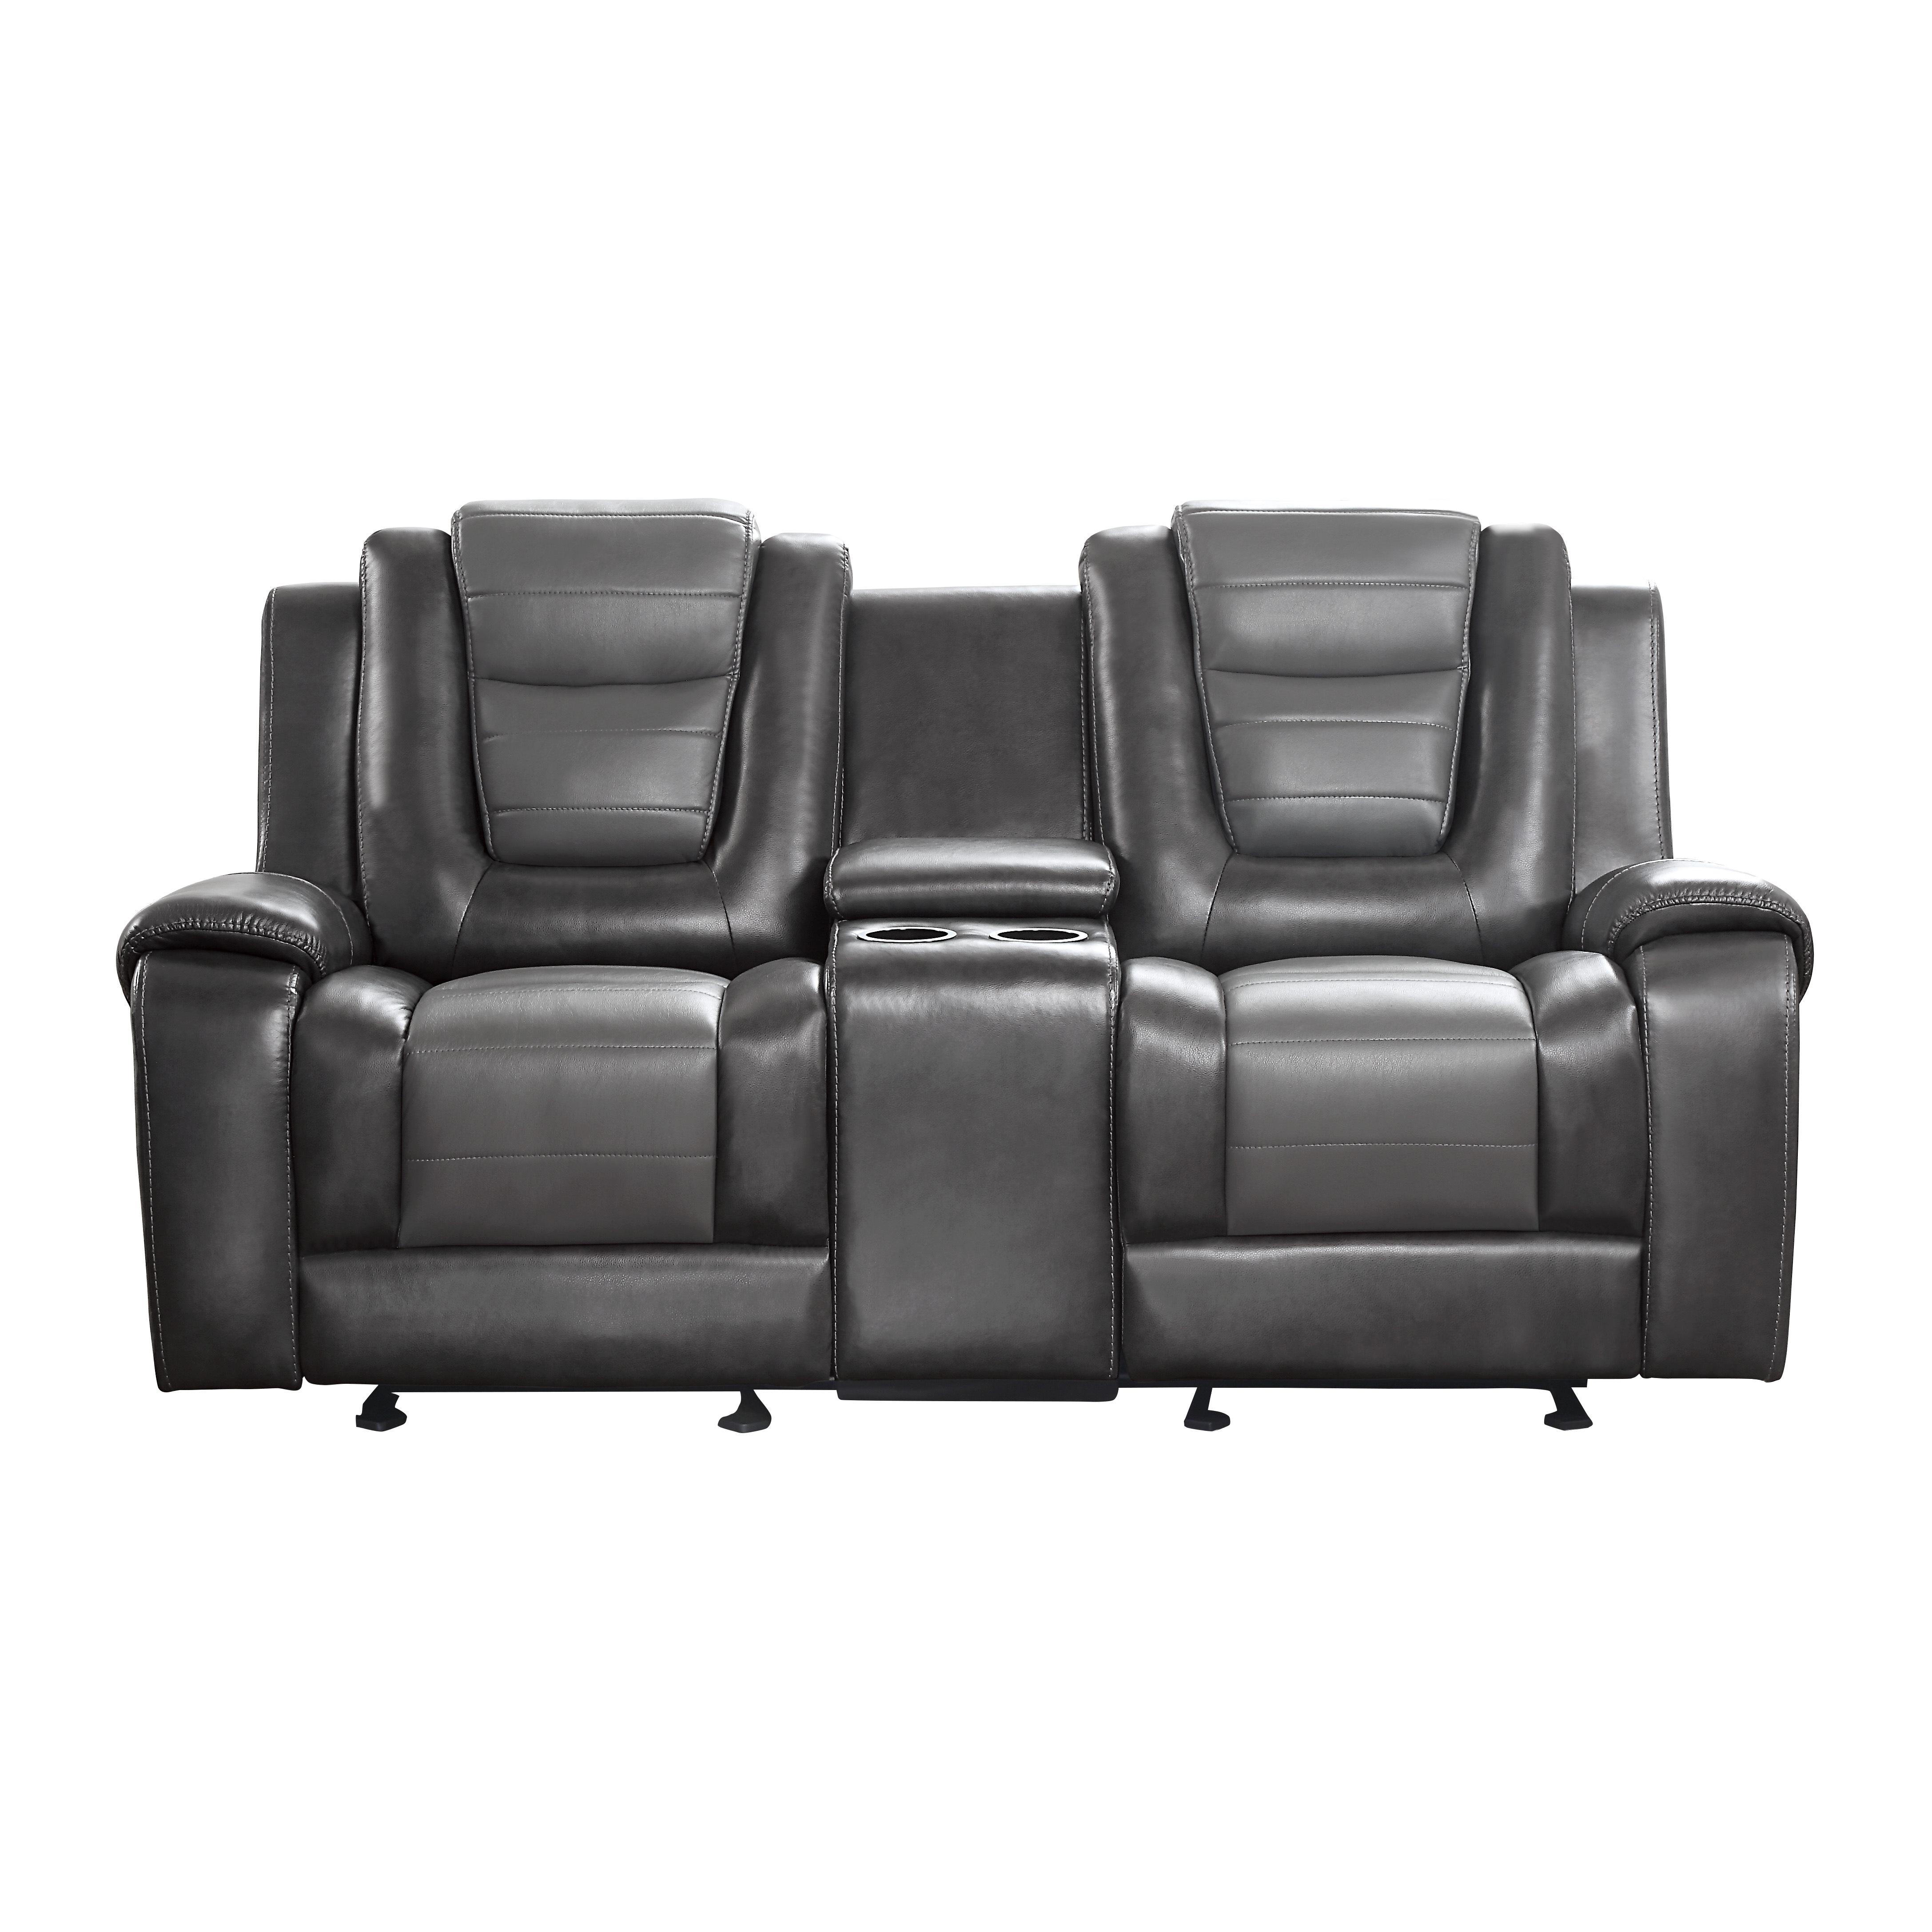 

    
Transitional Dark Gray & Light Gray Faux Leather Reclining Loveseat Homelegance 9470GY-2 Briscoe
